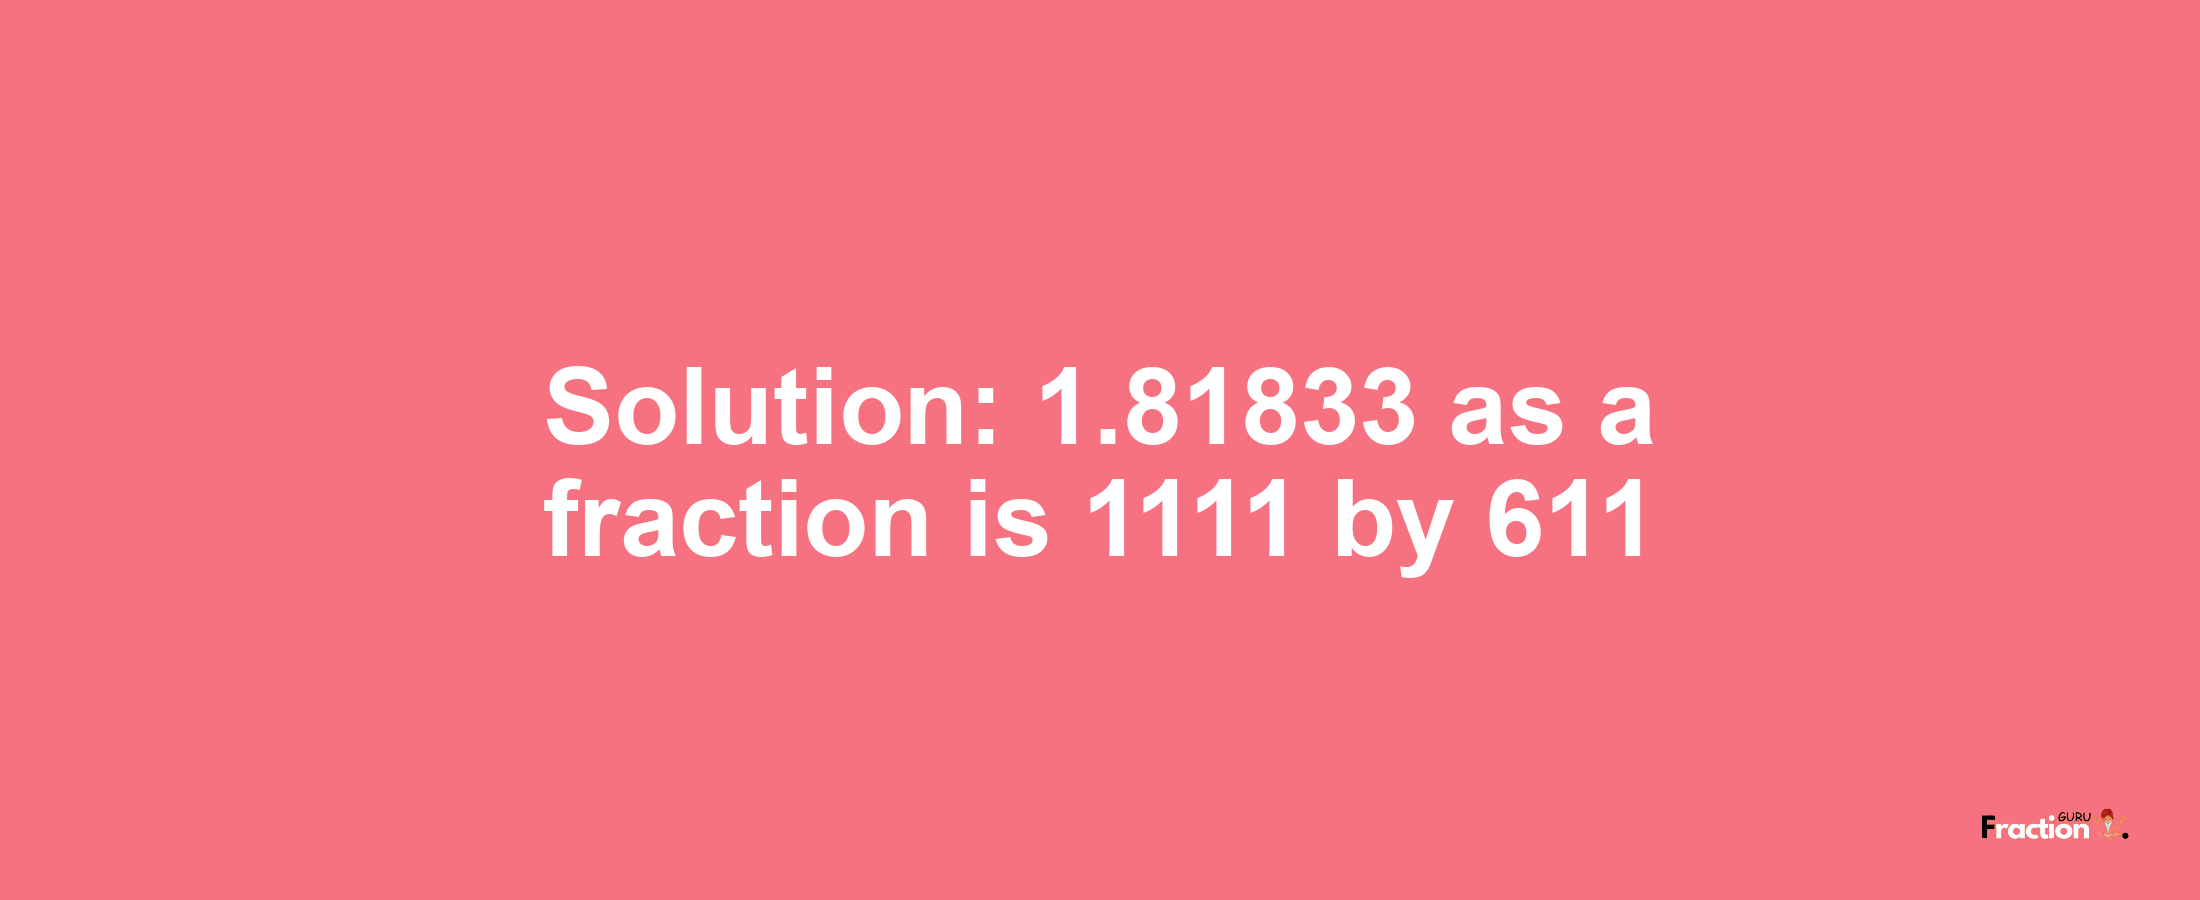 Solution:1.81833 as a fraction is 1111/611